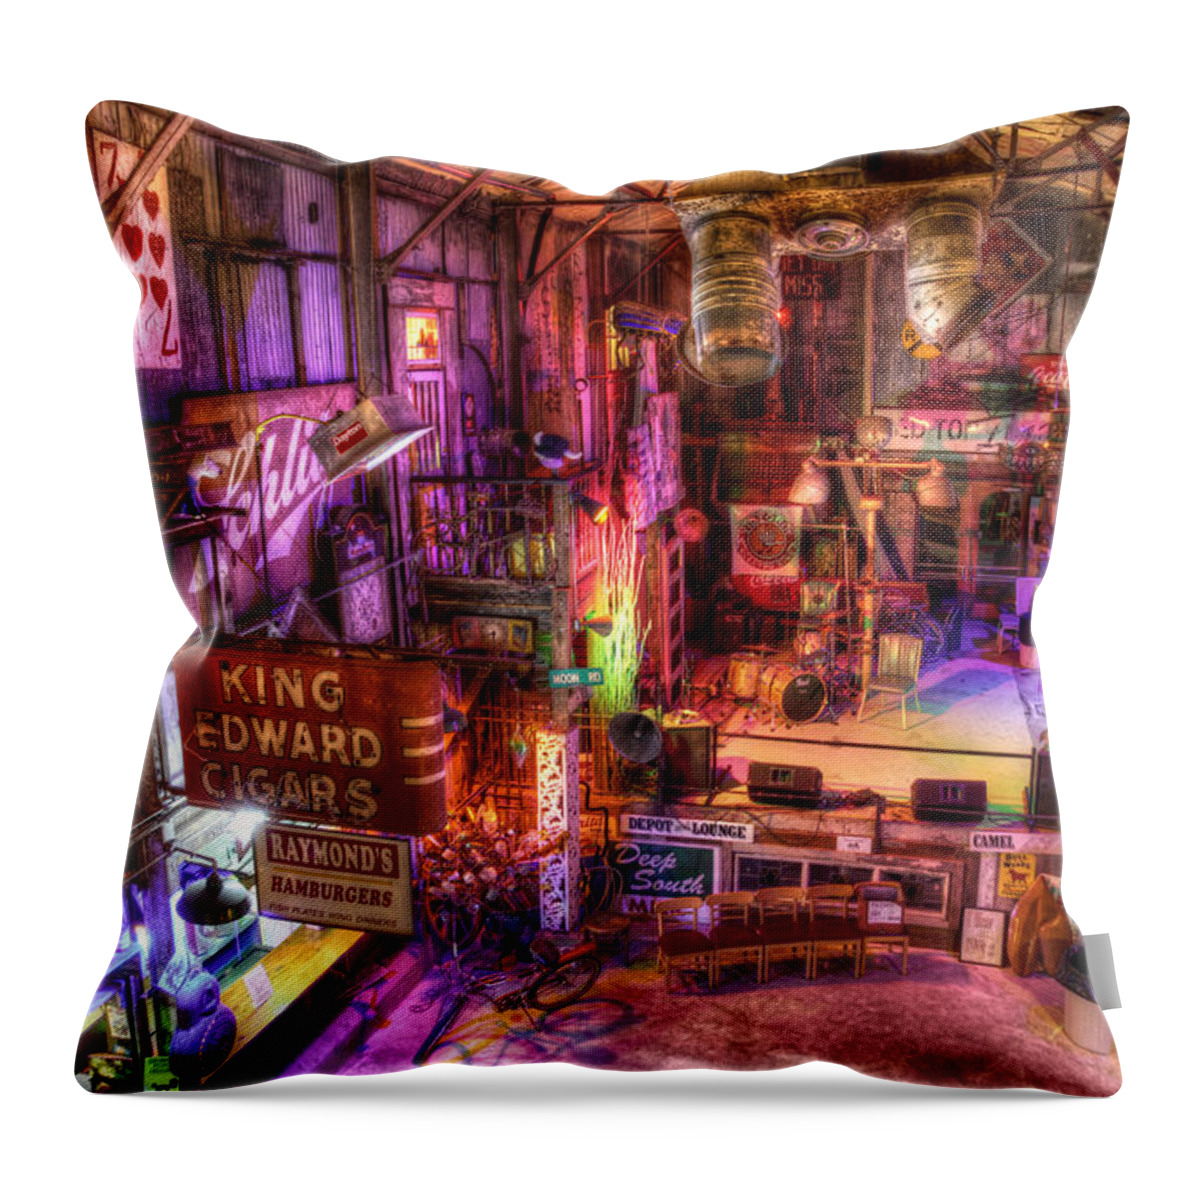 Shackup Inn Throw Pillow featuring the photograph Shackup Inn Stage by Daniel George